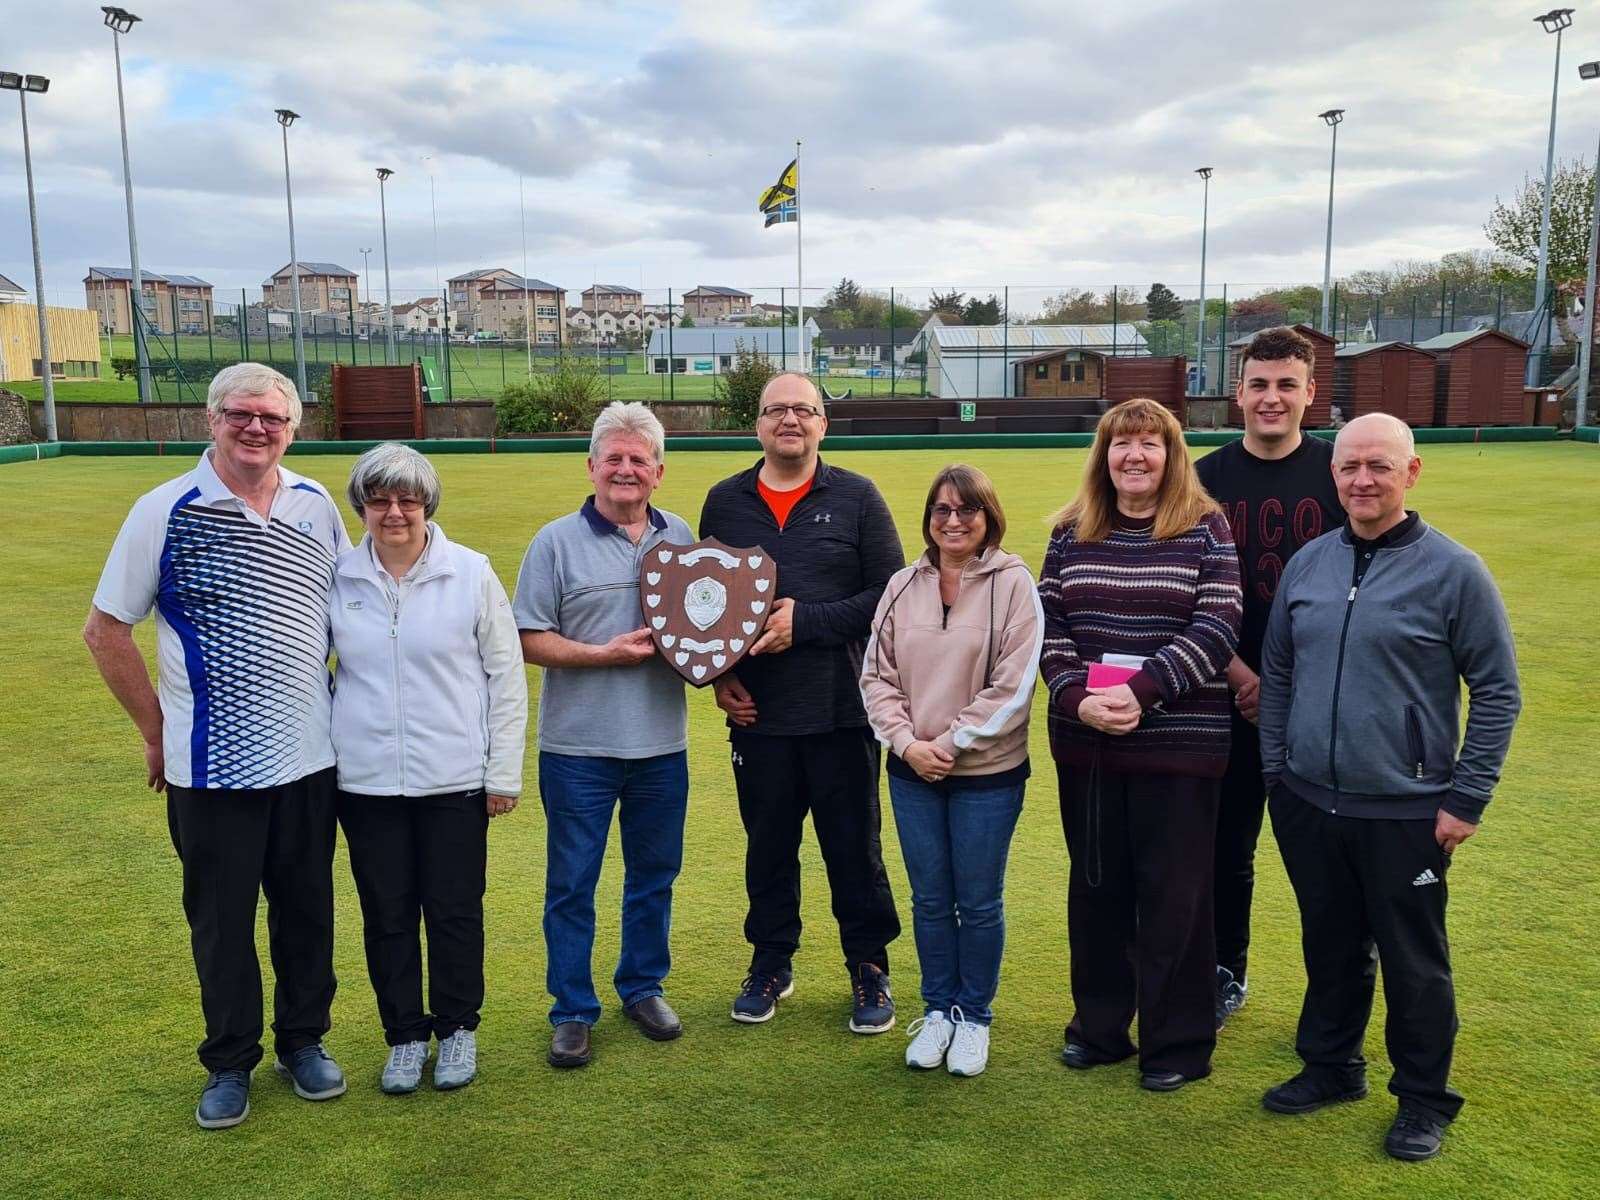 ﻿From left: Douglas Morrison, Linda Morrison (Pairs League runners-up), Ali Gray, Stephen Rollinson (winners), Julie Knapp, Janet Sinclair (third) and Ian Mackay and Alec Mackay (fourth).